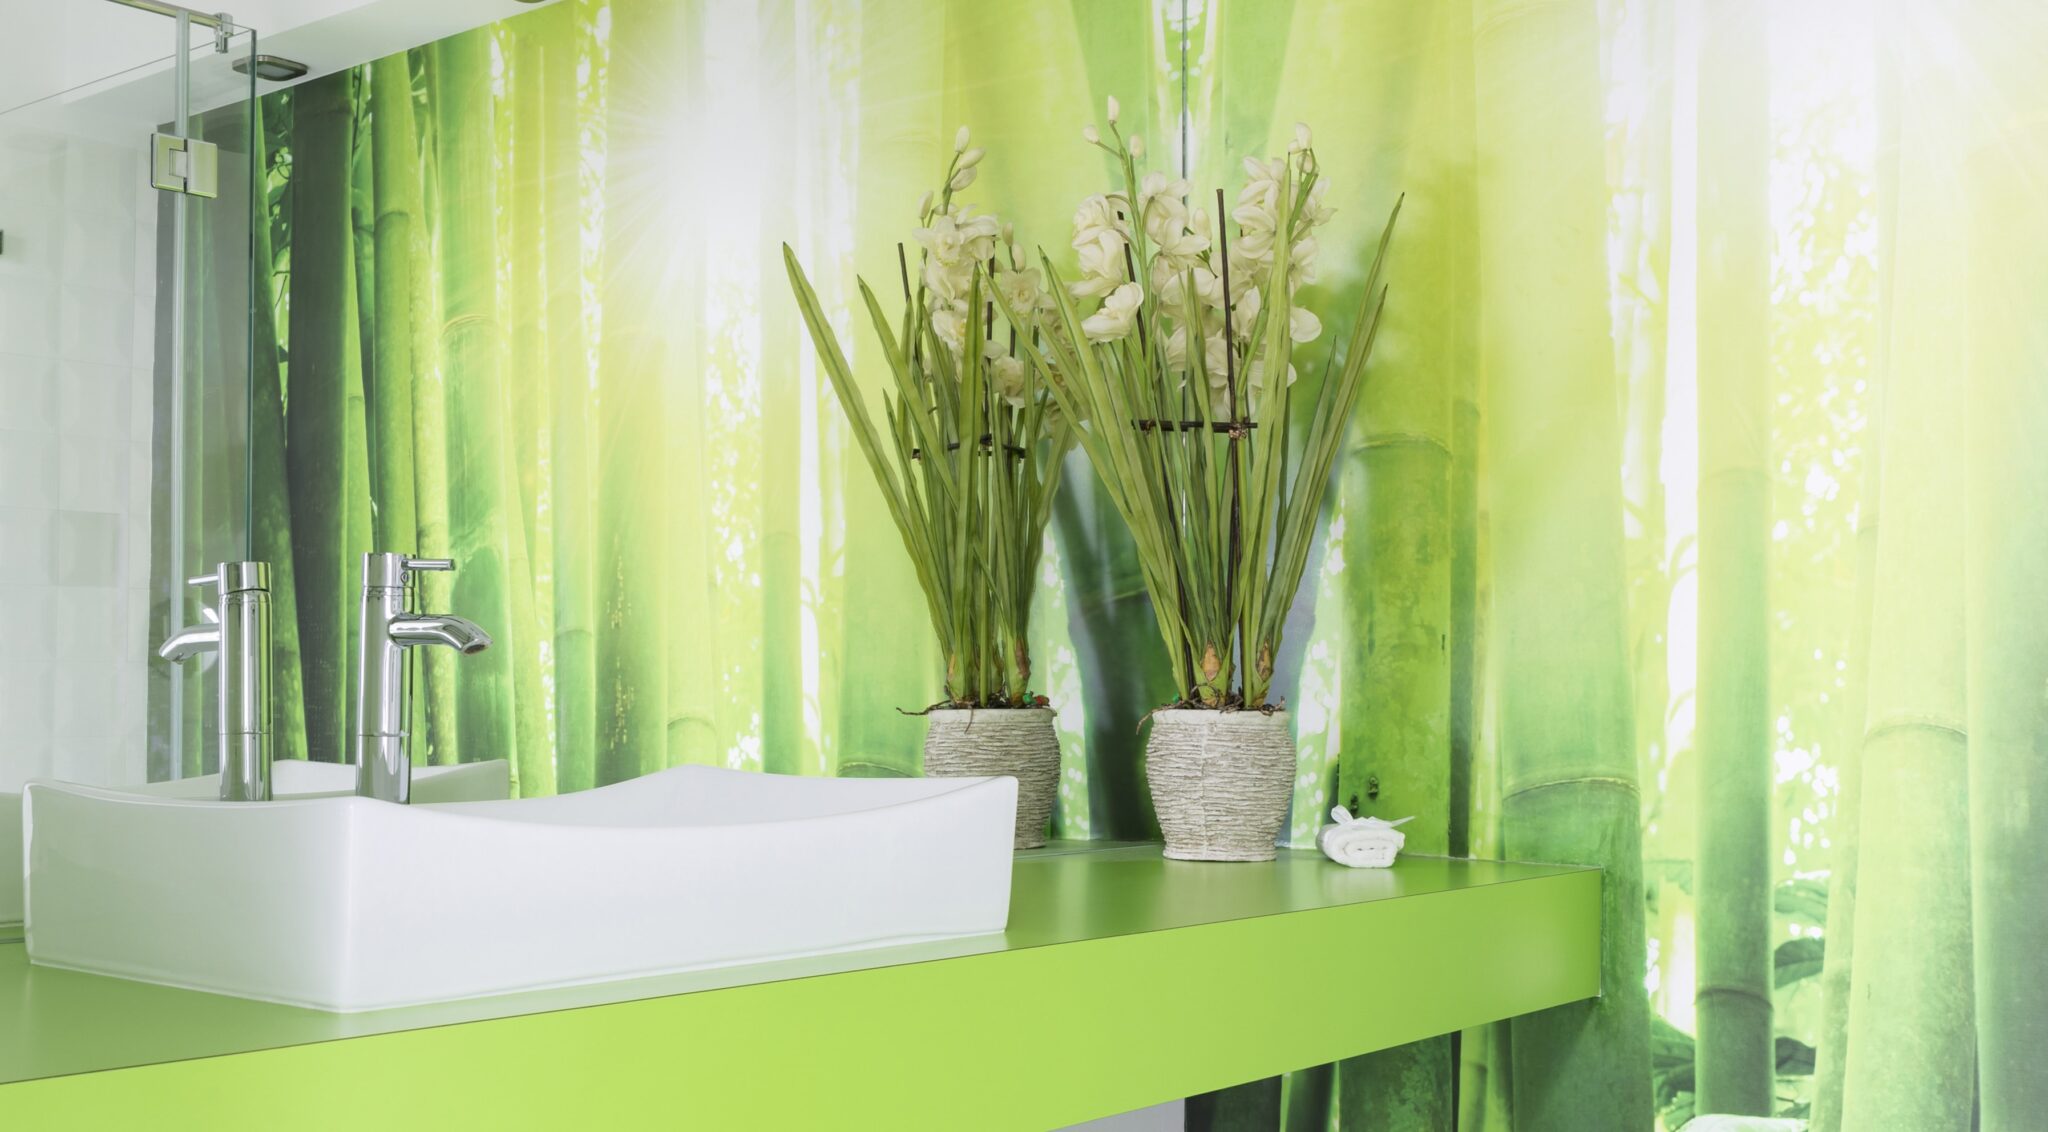 Full wall printed glass splashback with image of green bamboo by Artform Collective.